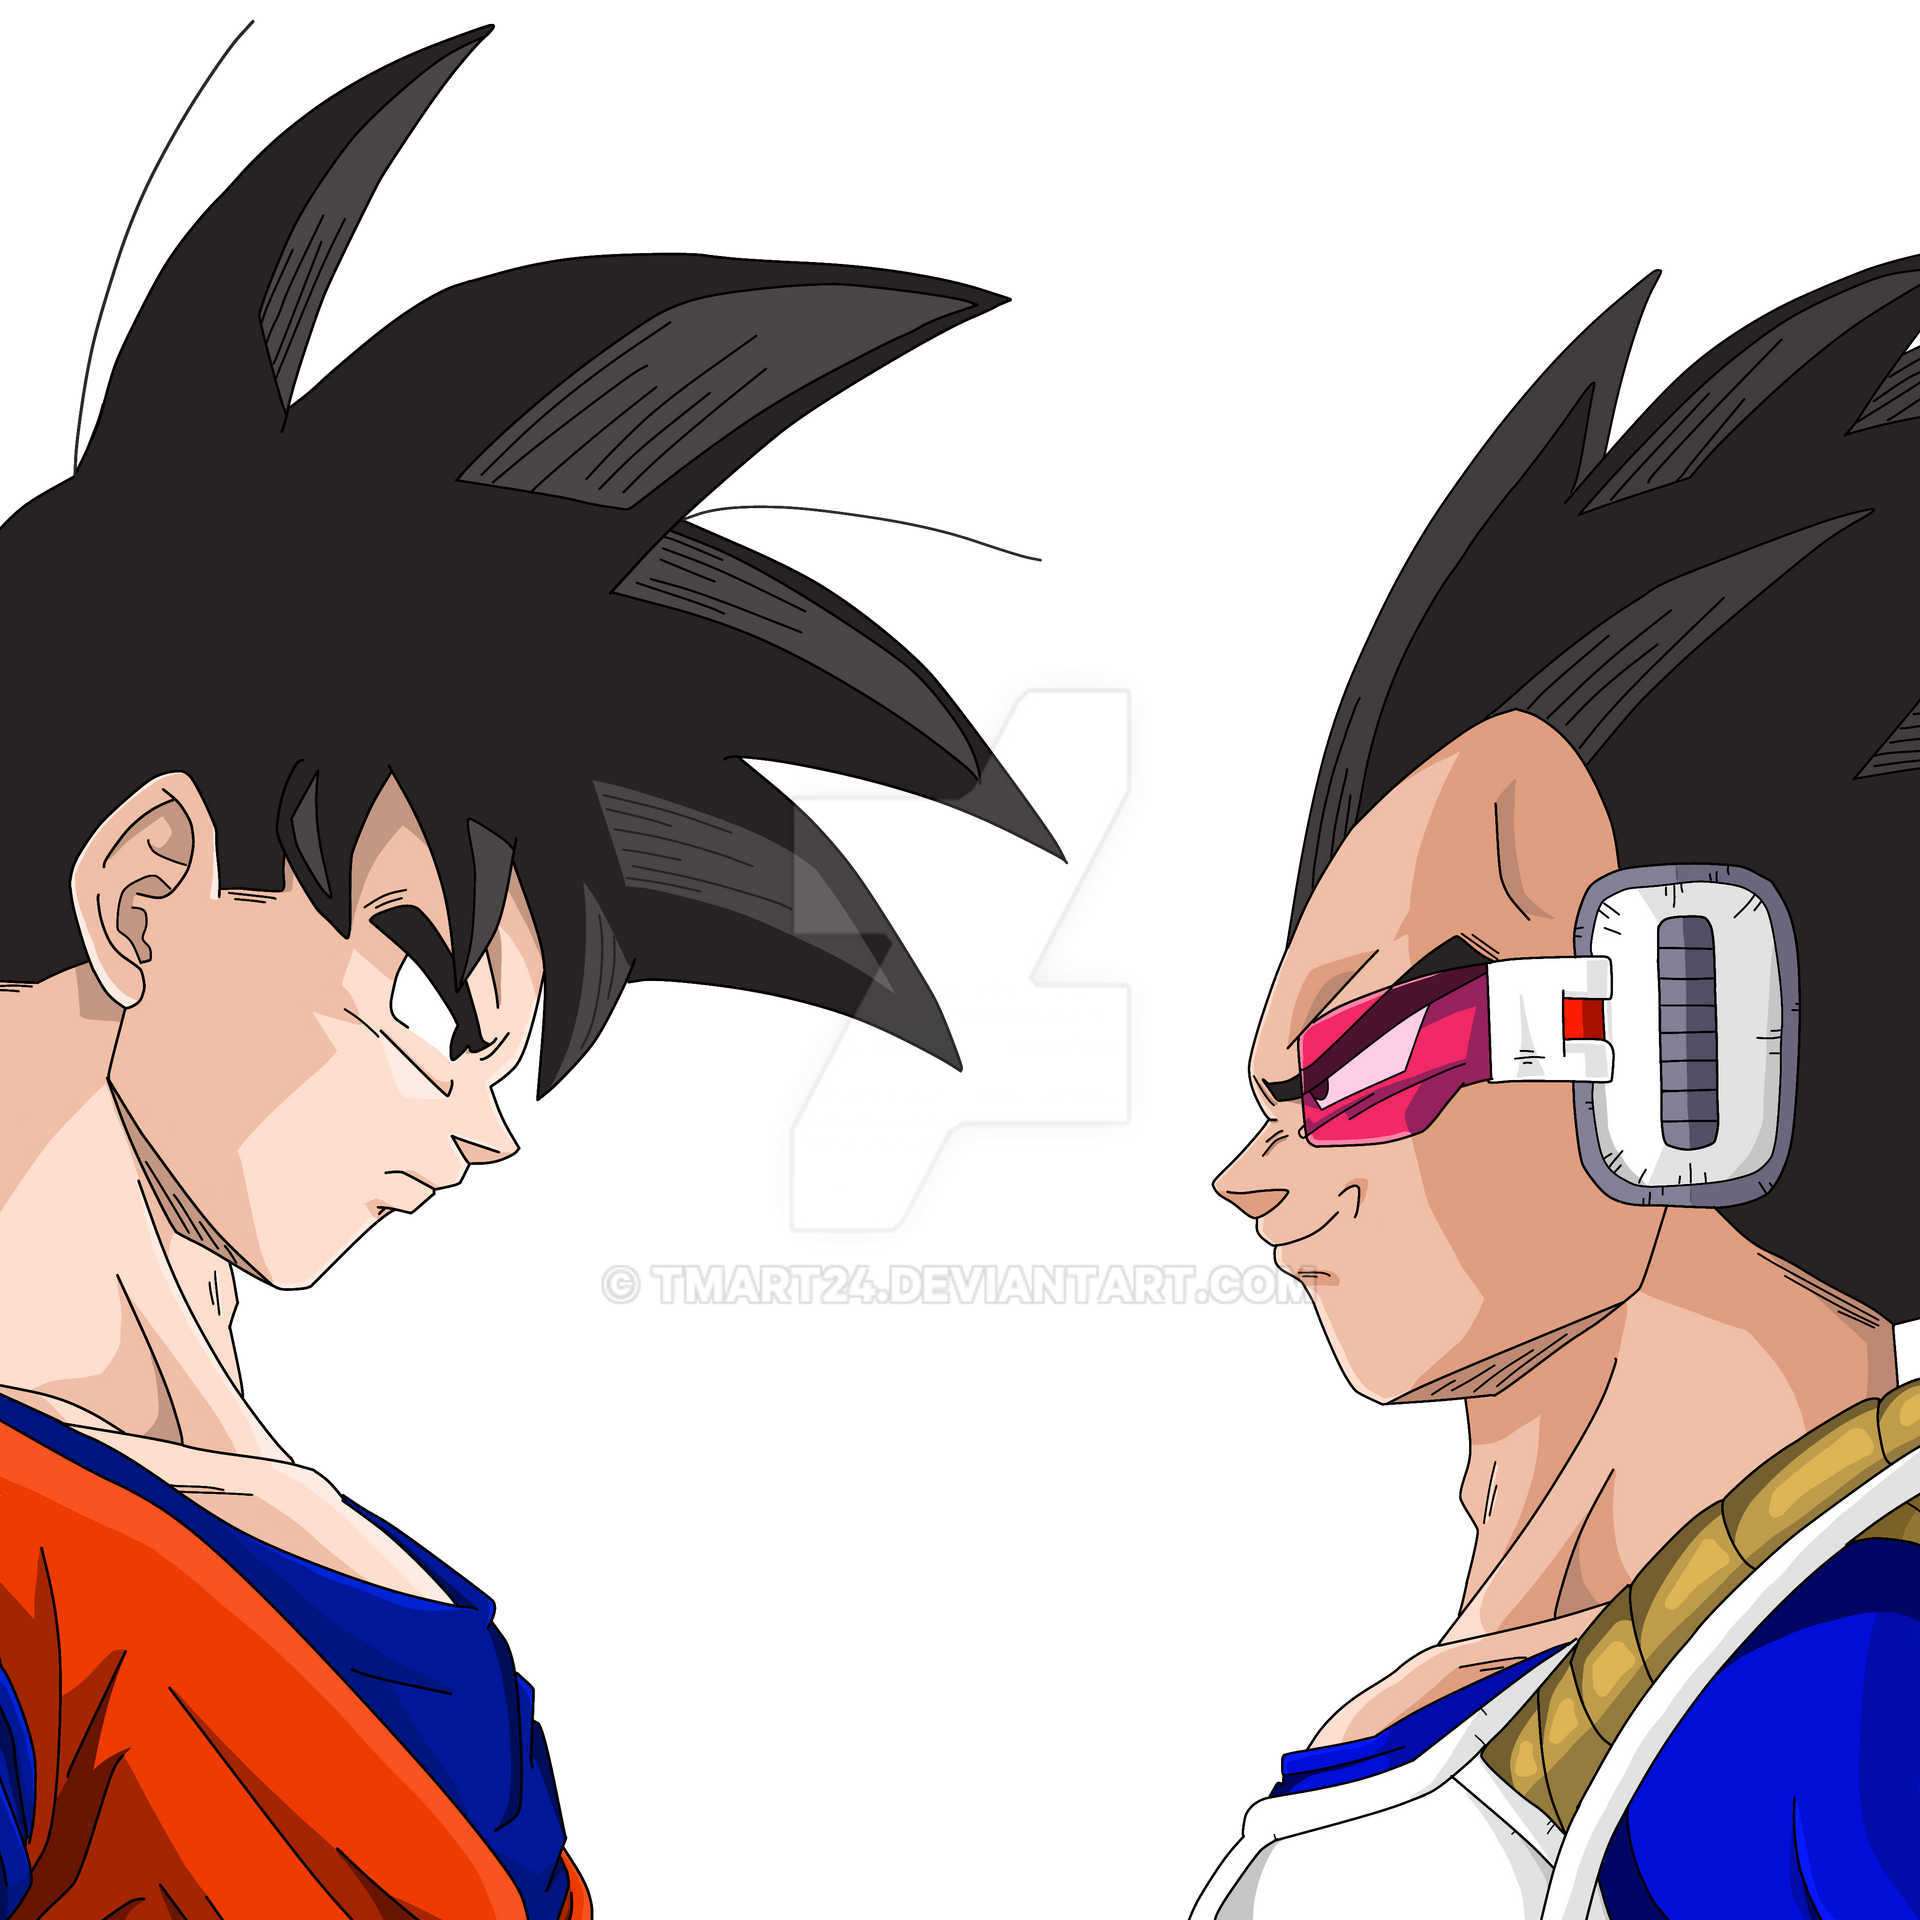 Poster Dragon Ball Z Sagas by Dony910 on DeviantArt